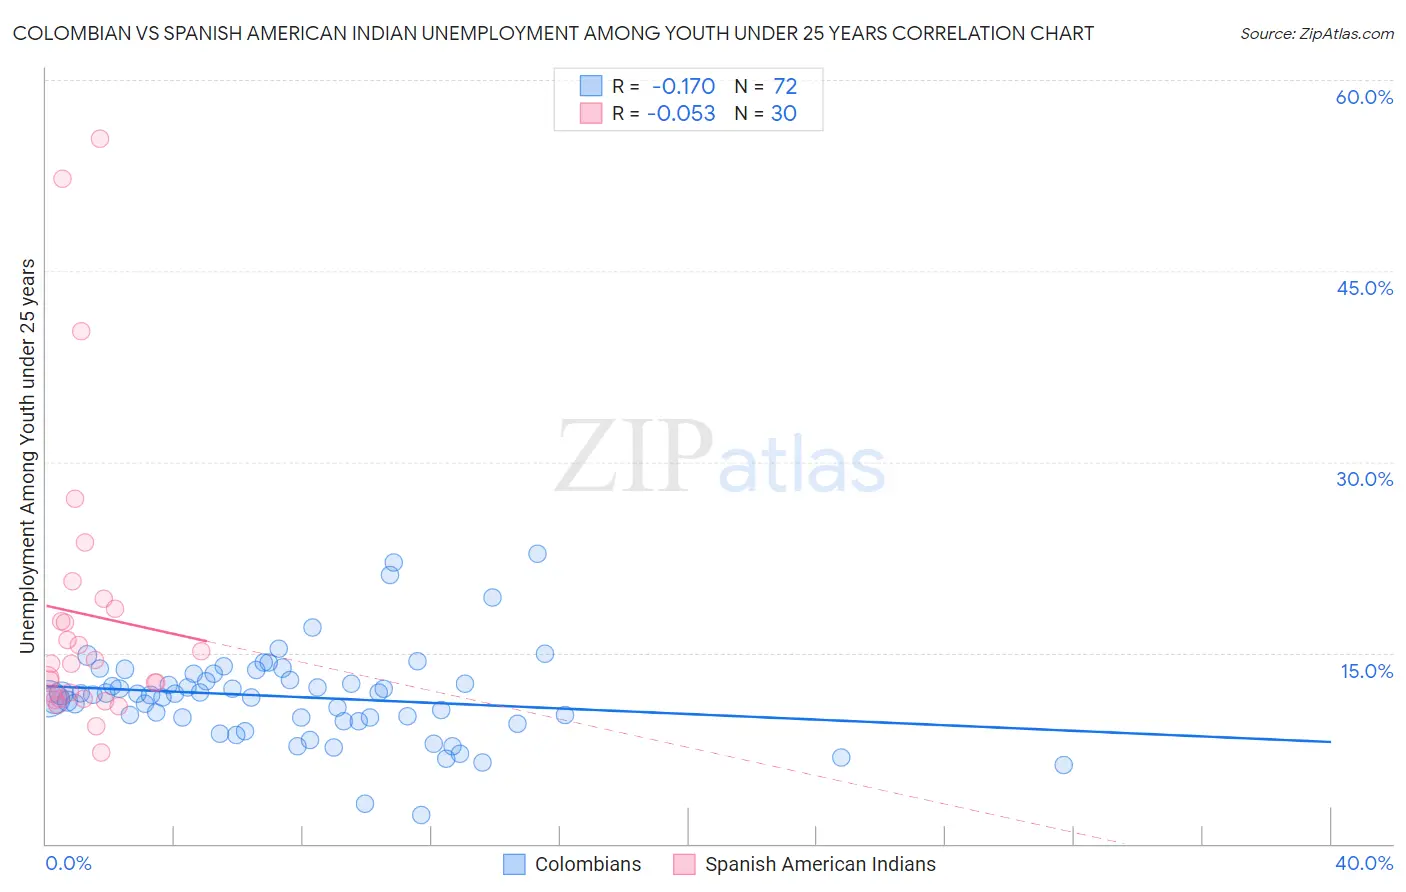 Colombian vs Spanish American Indian Unemployment Among Youth under 25 years